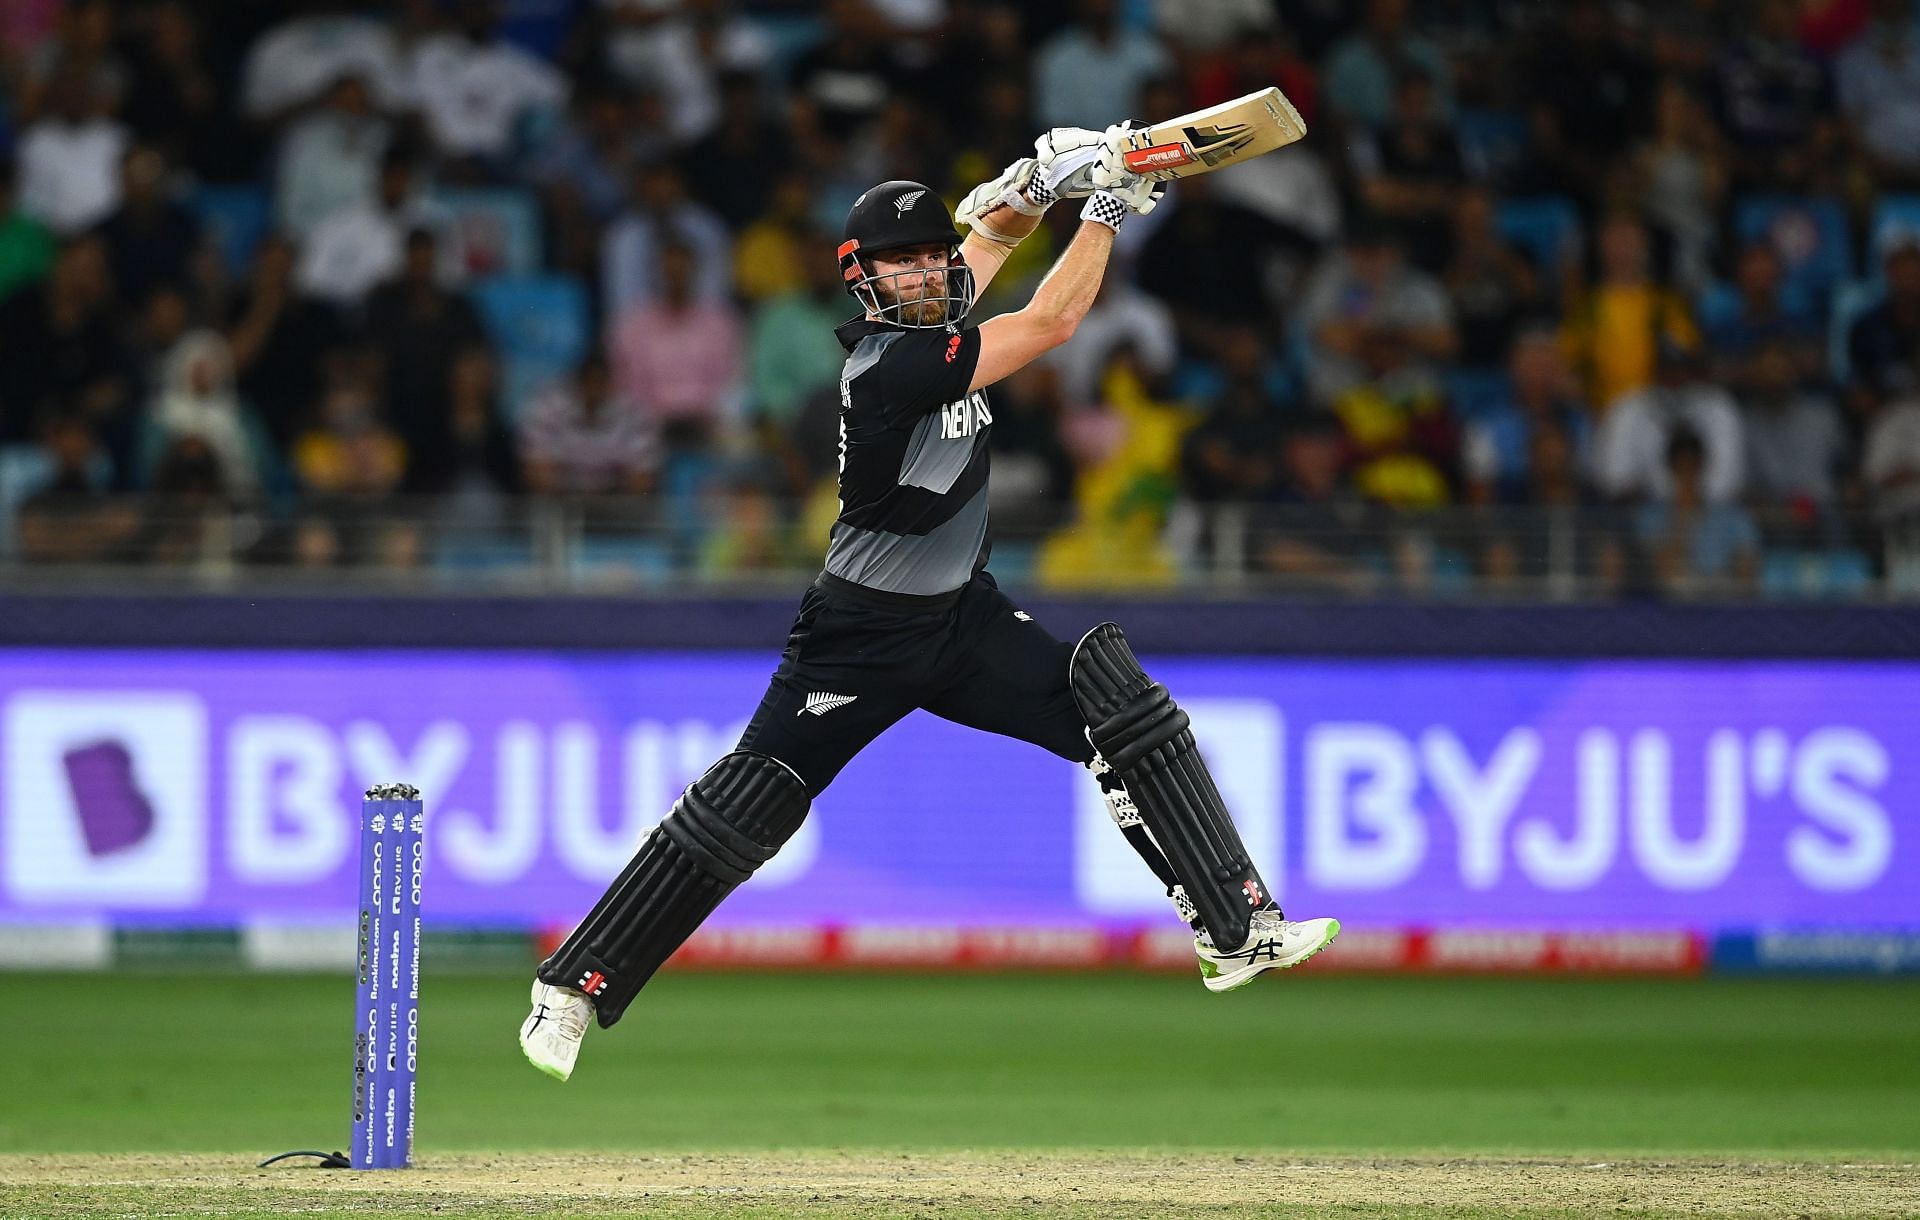 Kane Williamson scored a masterful 85 against Australia in the T20 World Cup Final 2021